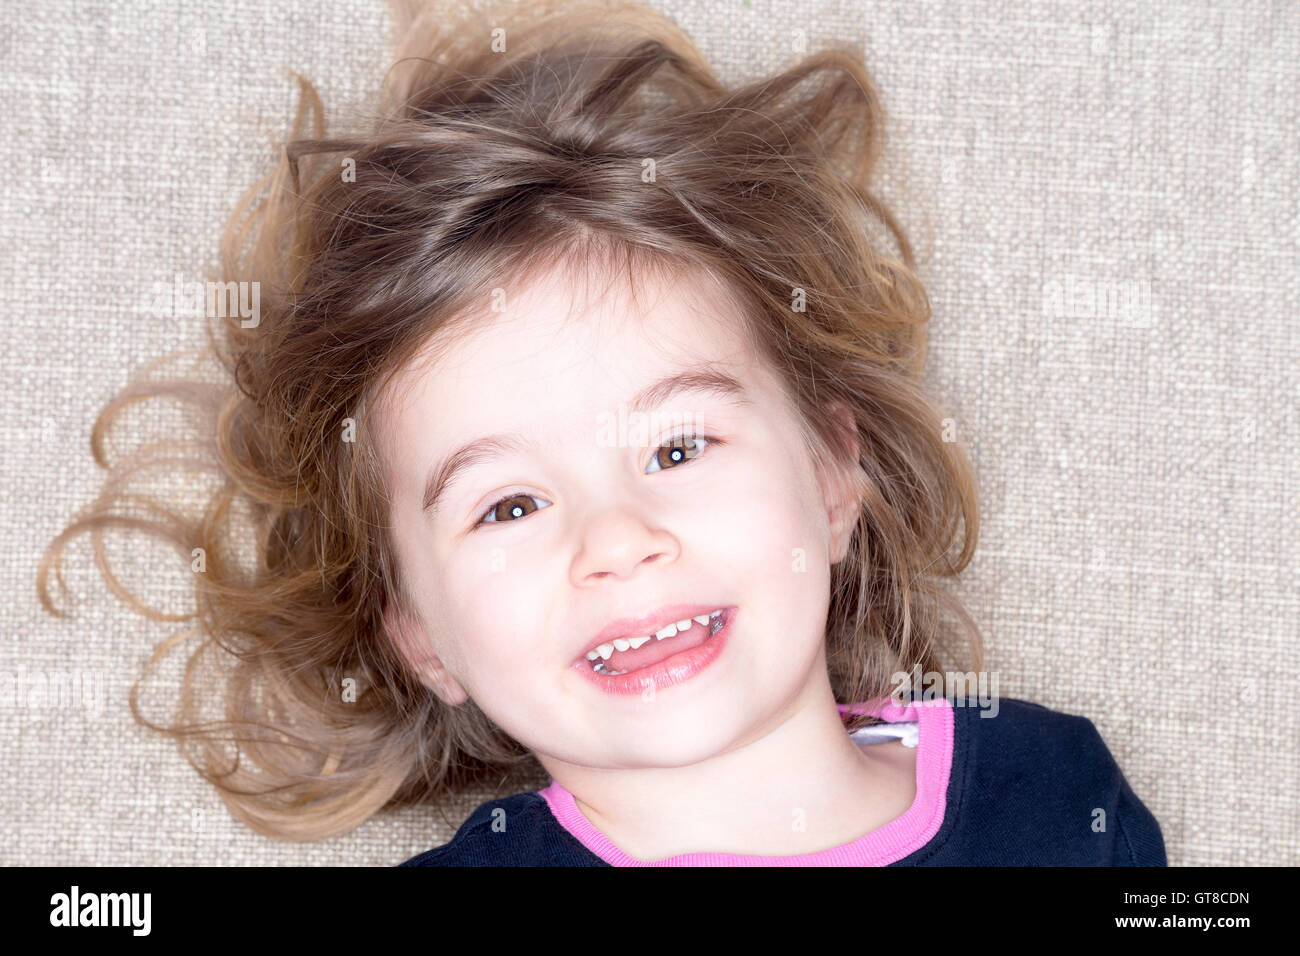 Pretty vivacious three year old little girl lying on a carpet with her hair flying around her face smiling happily up at the cam Stock Photo